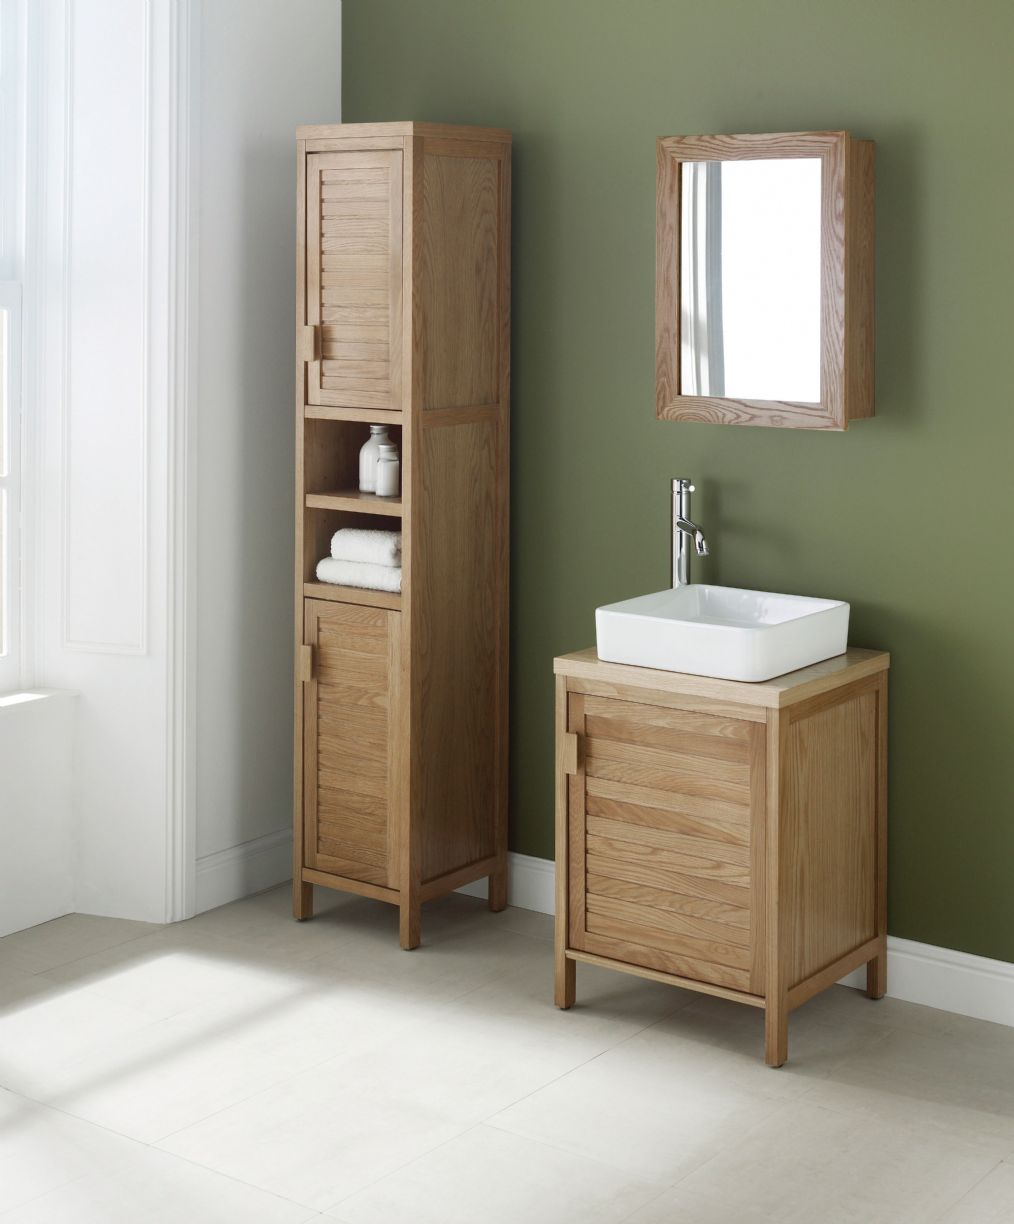 Freestanding Bathroom Furniture Cabinets Uv Furniture with regard to sizing 1014 X 1224